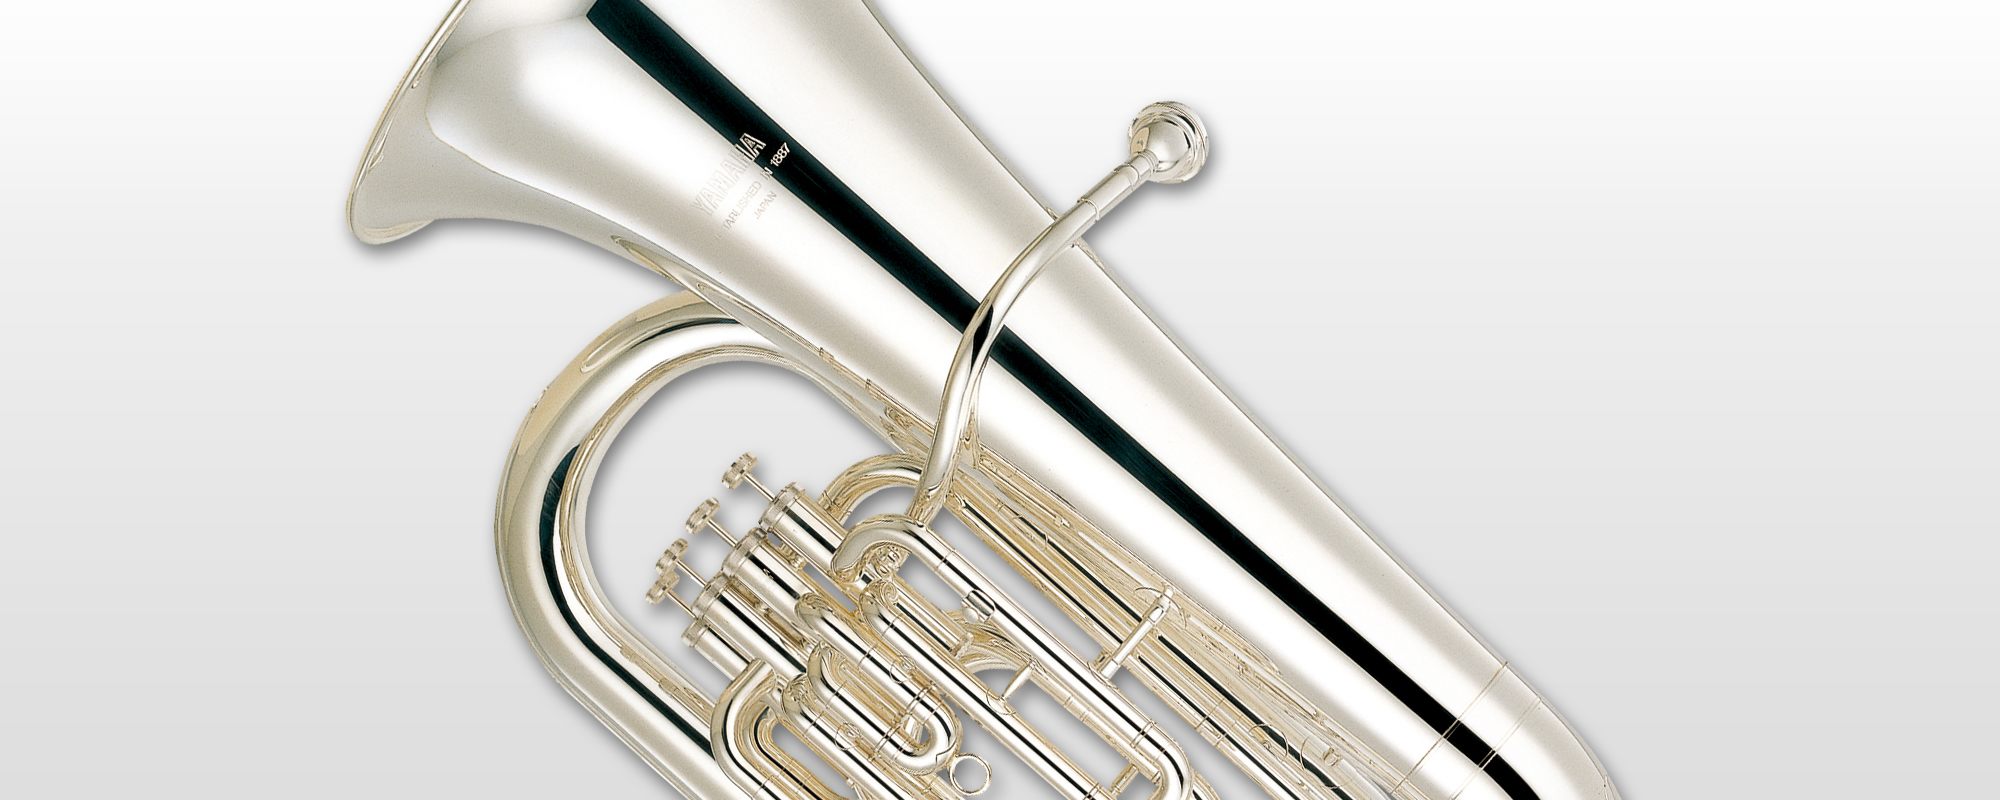 YEB-321S - Overview - Tubas - Brass & Woodwinds - Musical 